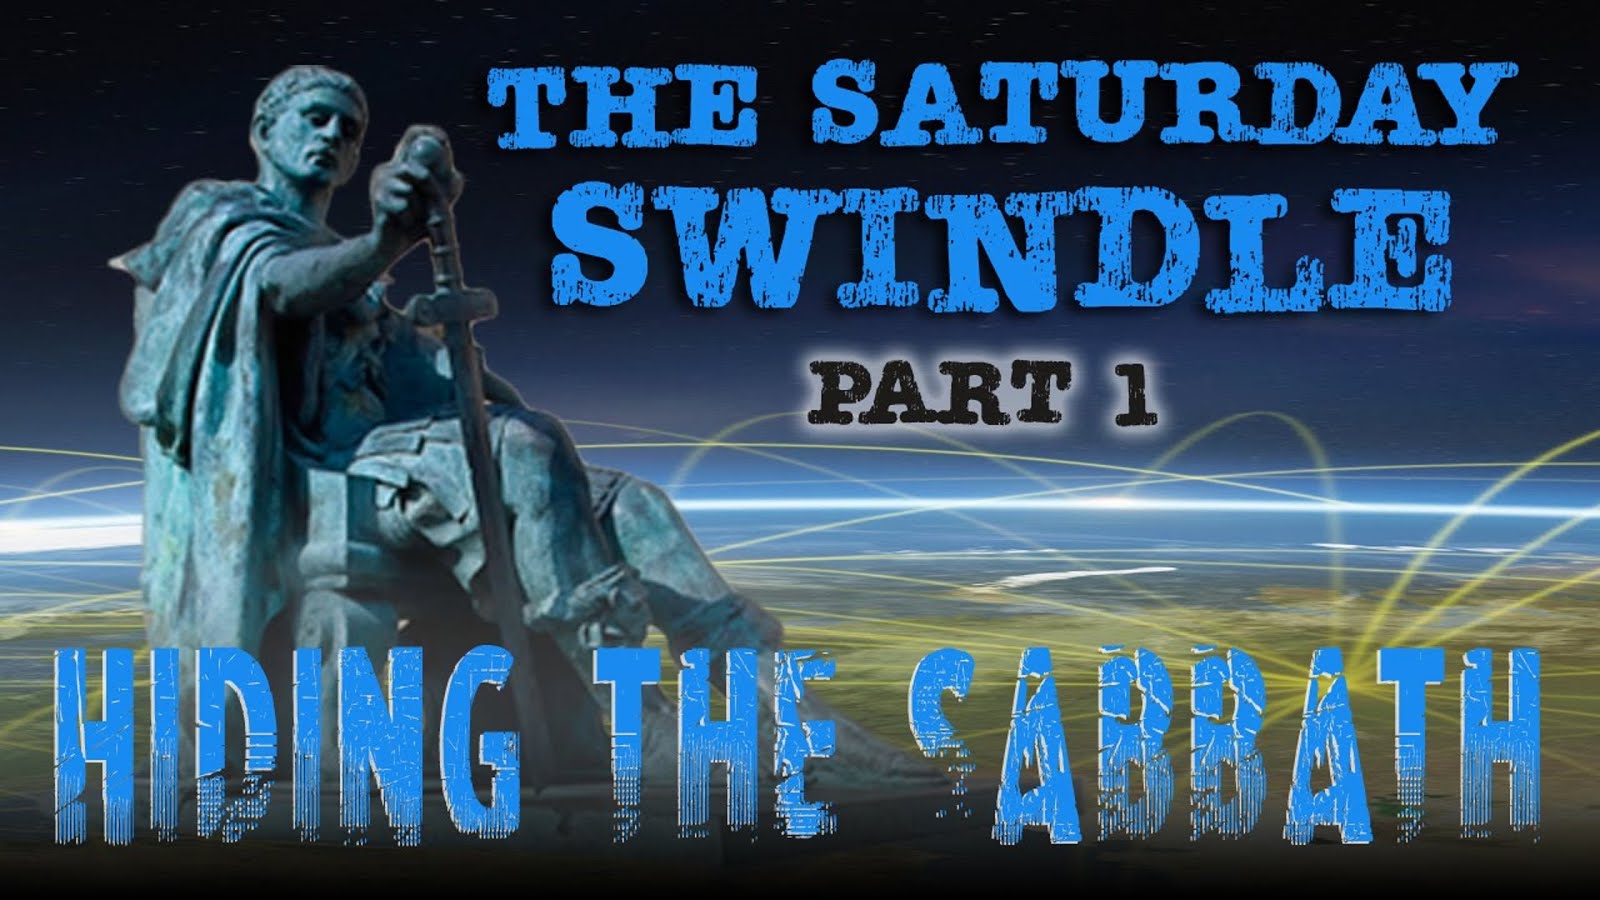 THE SATURDAY SWINDLE - PART 1